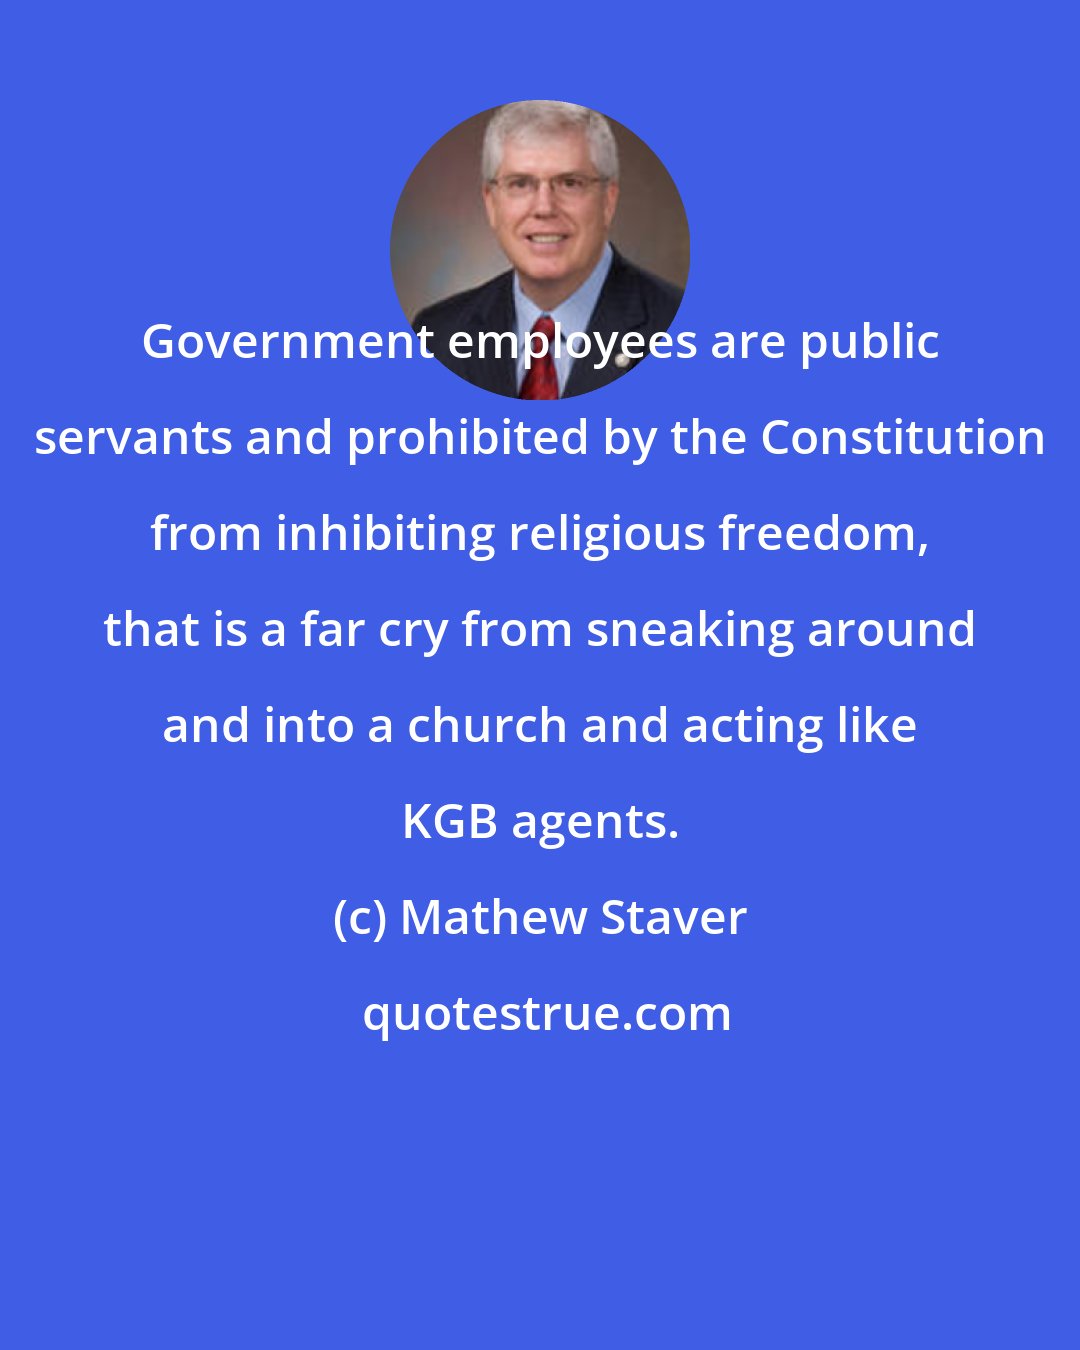 Mathew Staver: Government employees are public servants and prohibited by the Constitution from inhibiting religious freedom, that is a far cry from sneaking around and into a church and acting like KGB agents.